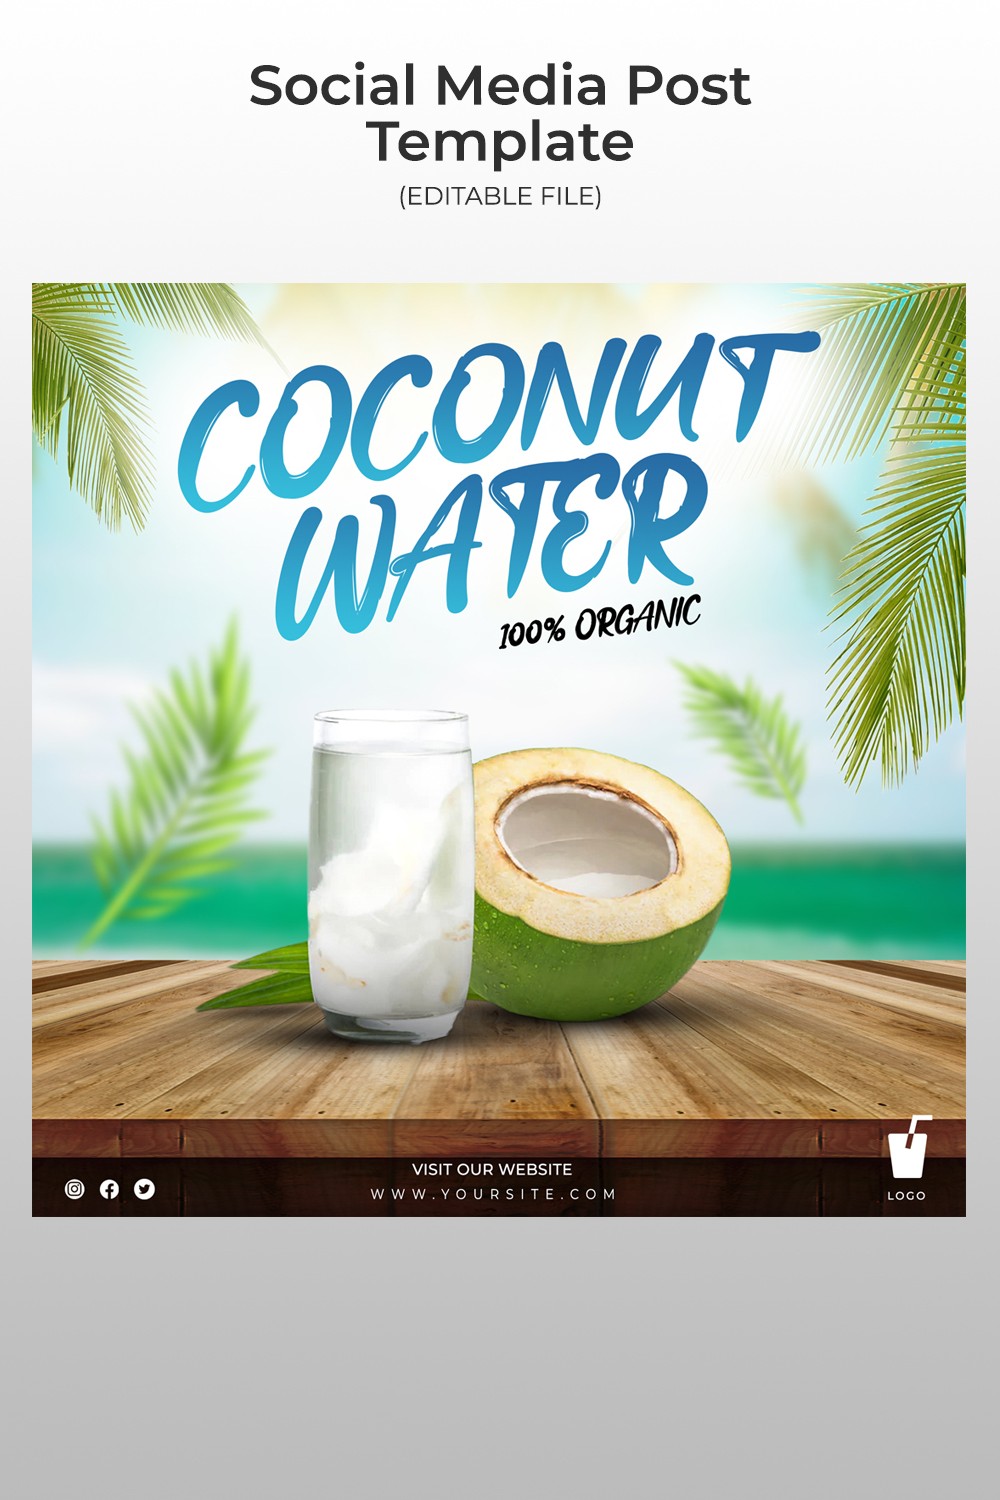 Coconut Water Social Media Post Template - pinterest image preview.